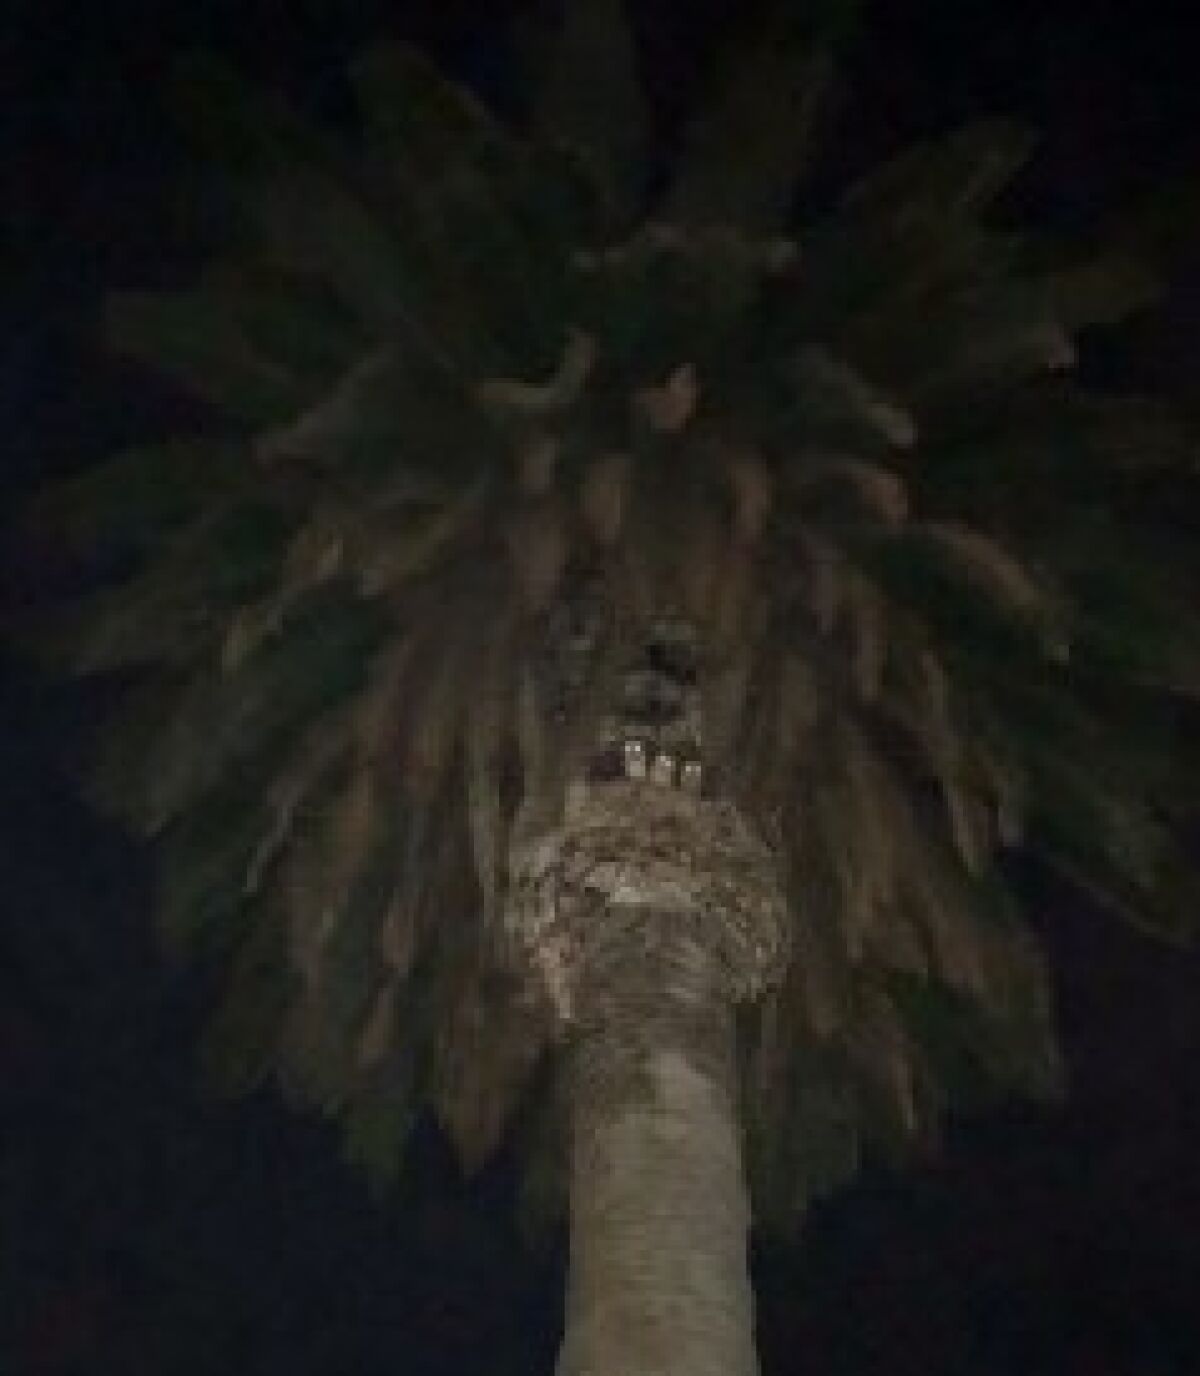 Three tiny barn owls were spotted in a tree on the La Jolla Recreation Center grounds.